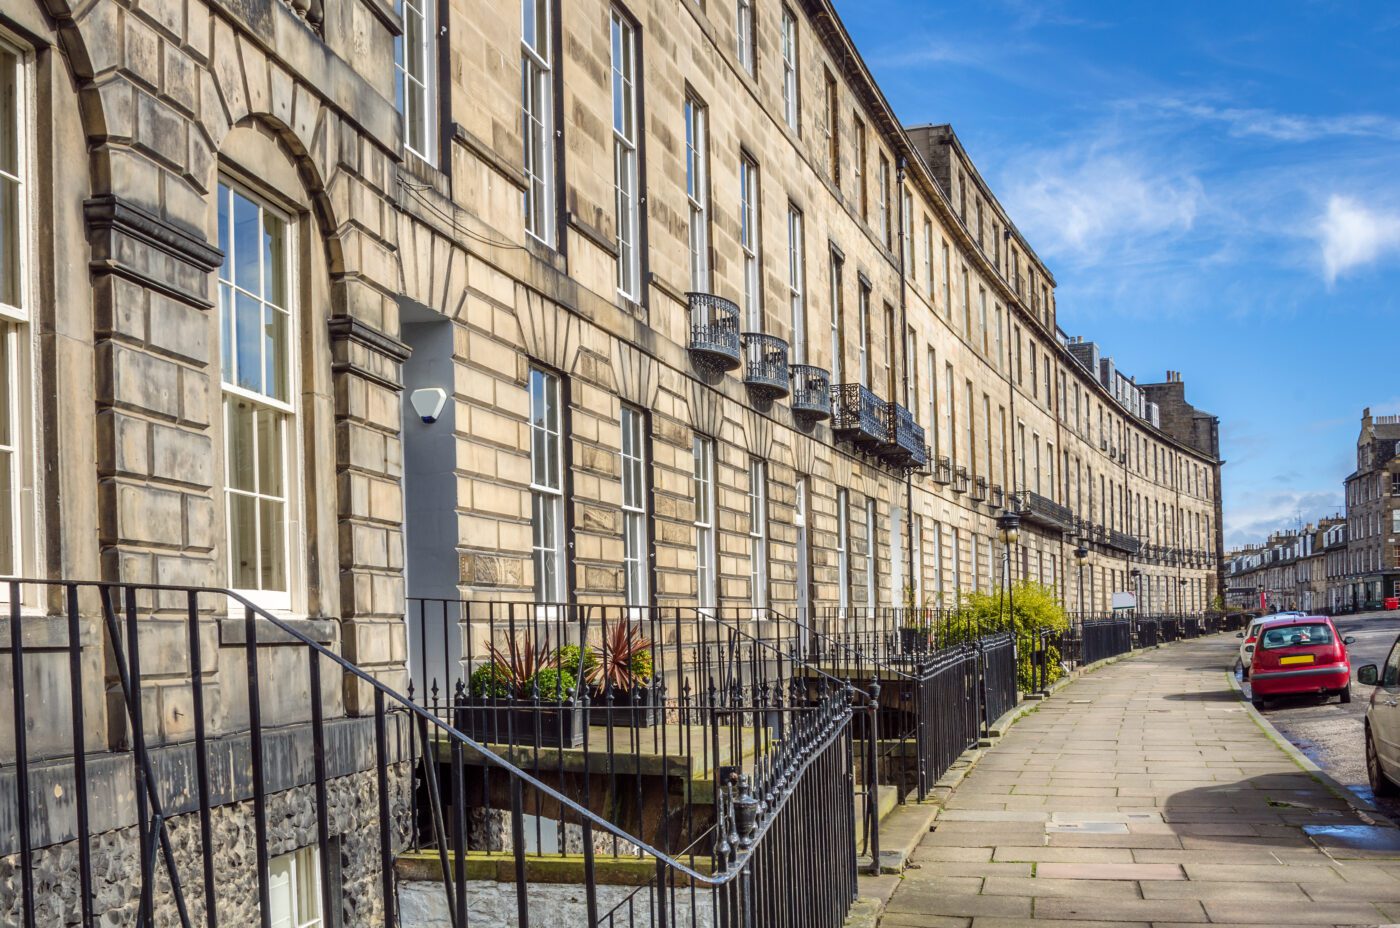 Town Houses in New Town, Edinburgh. The setting of Dexter's flat in Netflix One Day.